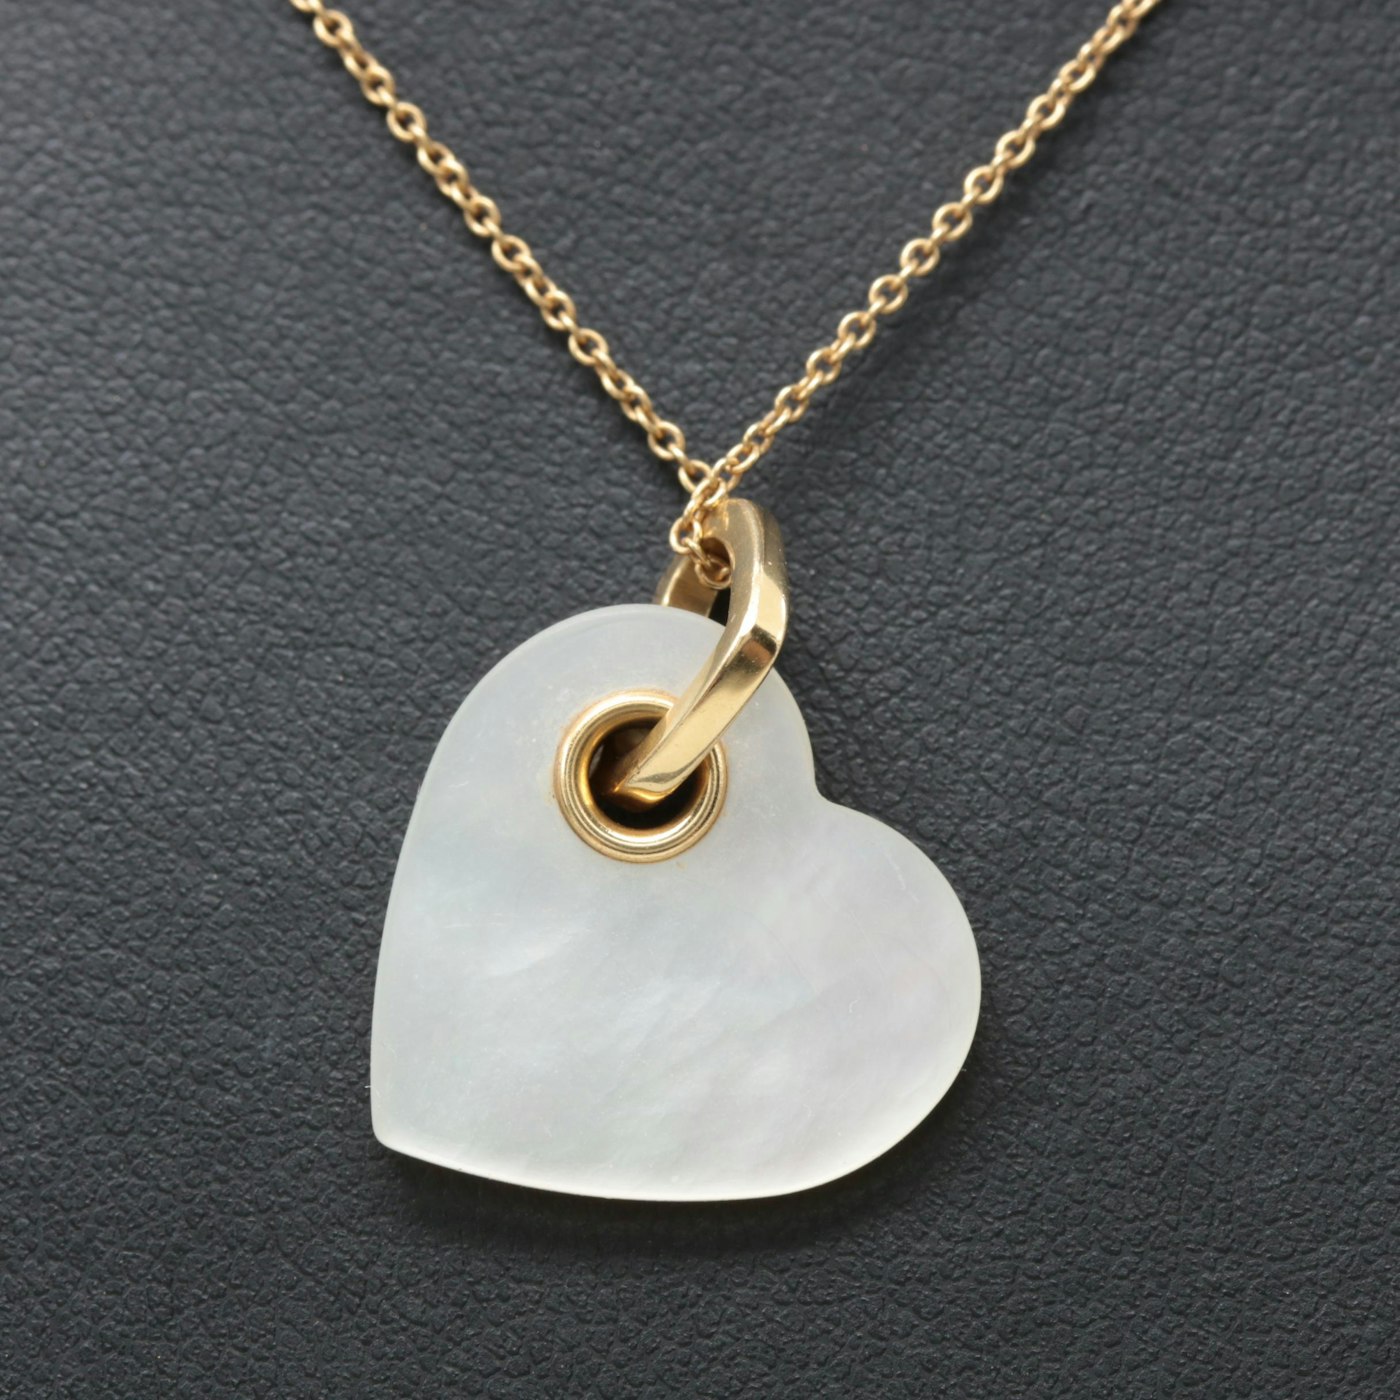 Tiffany & Co. 18K Yellow Gold Mother of Pearl Heart Necklace | EBTH